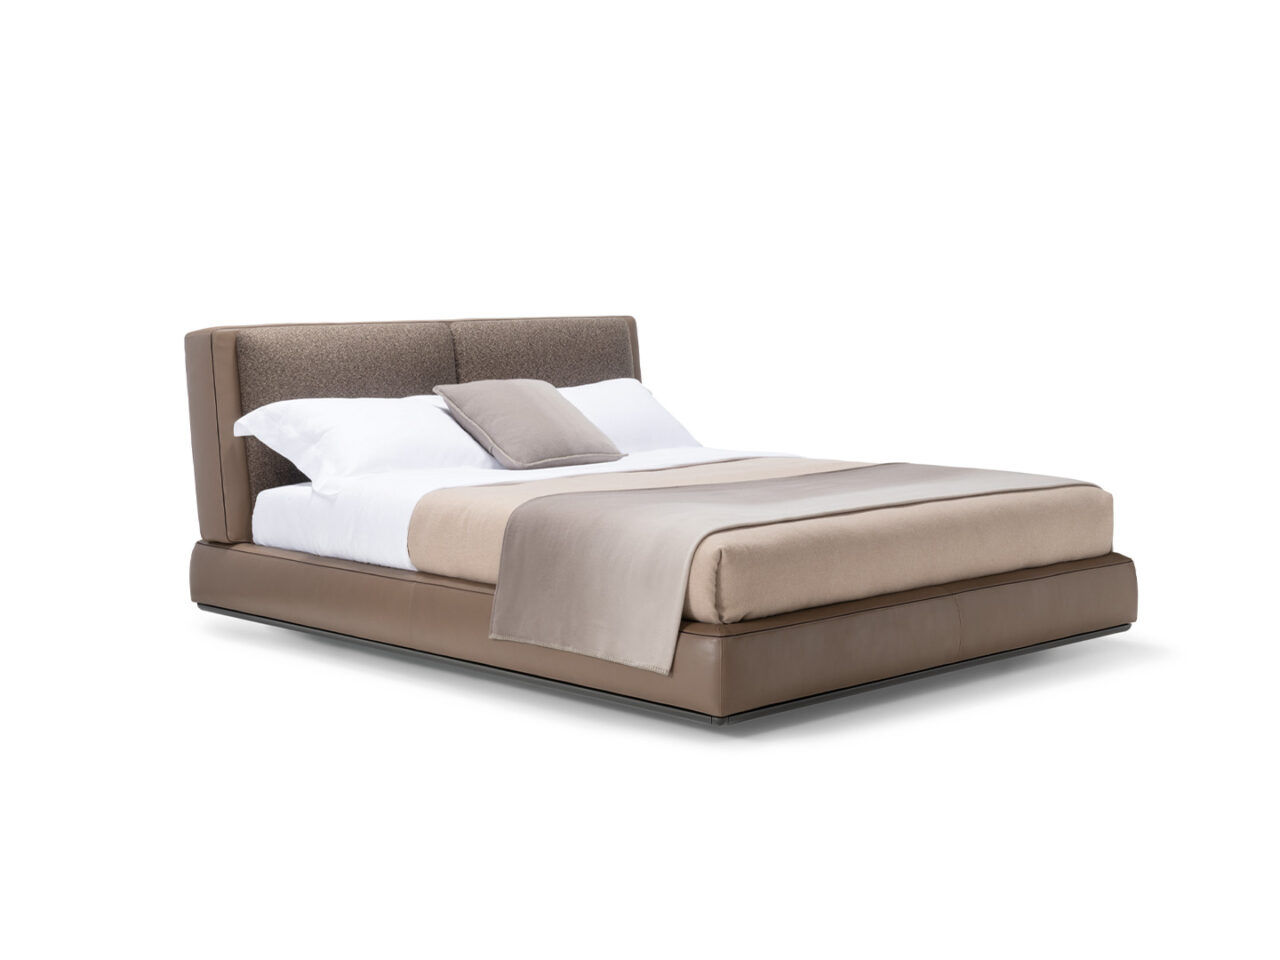 Aldgate is a bed designed by Rodolfo Dordoni proposed by Peverelli